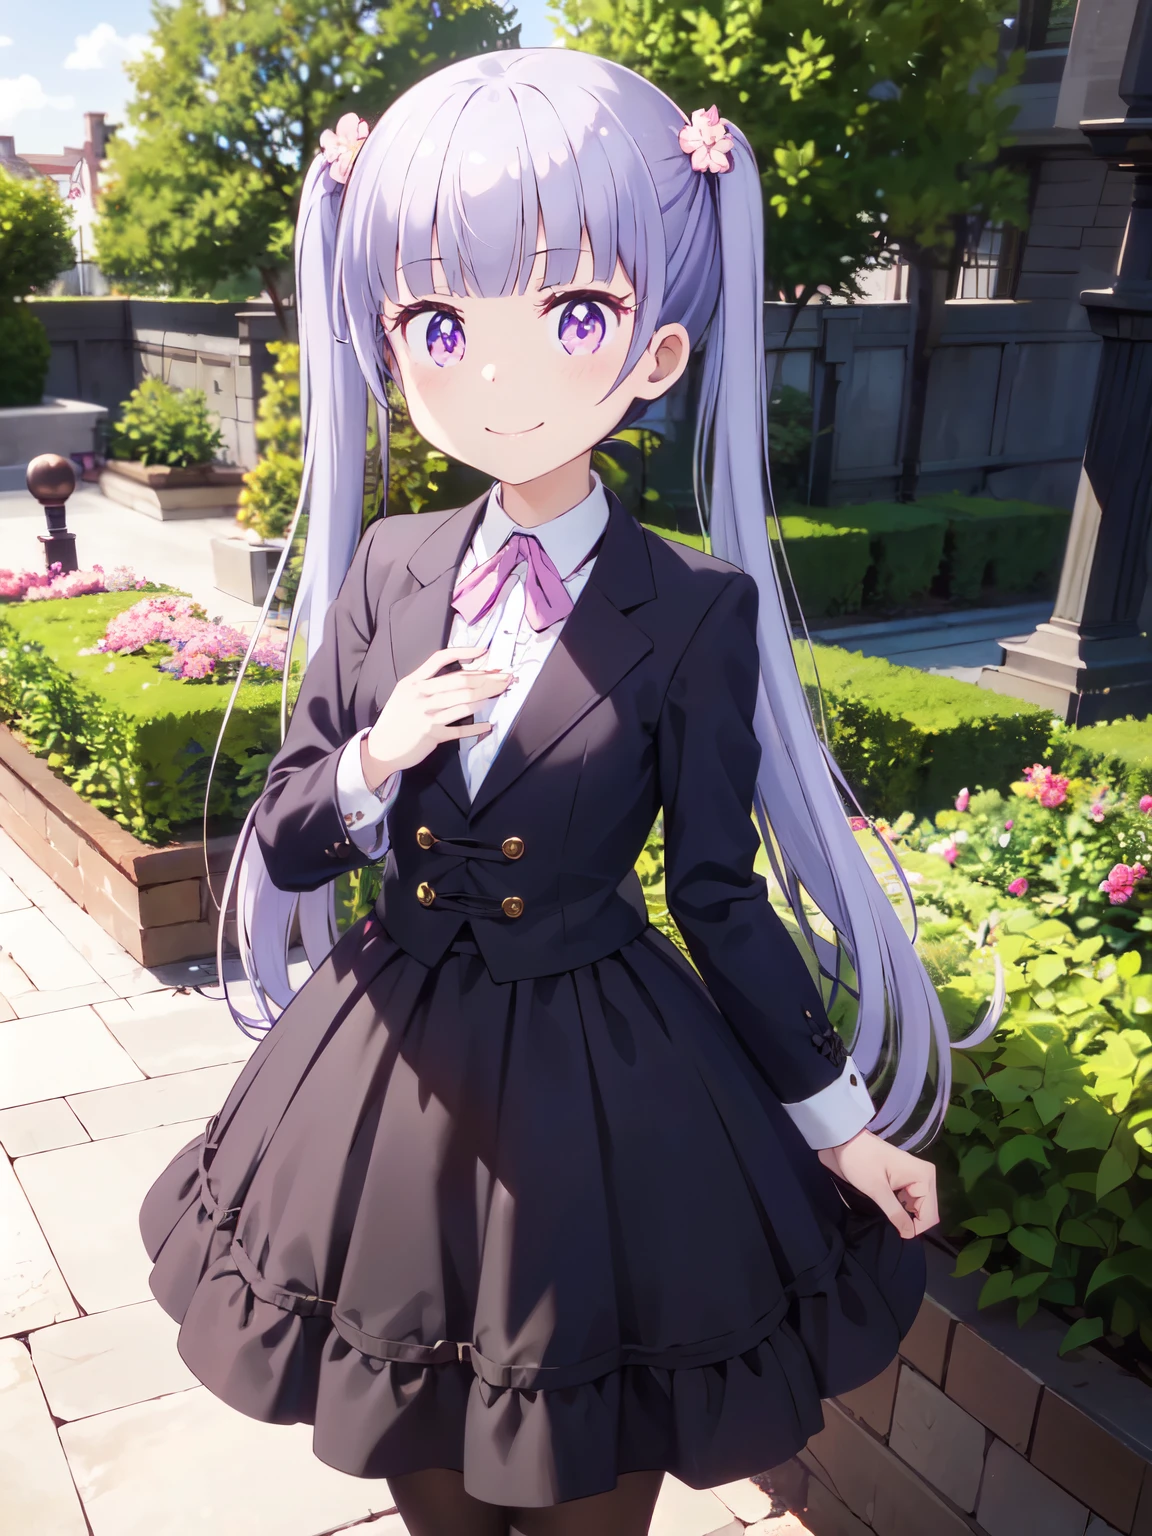  [3D Images:1.15]、garden、Overall long hair、1 girl, smile, suzukaze aoba, long hair, brown hair、bright pupils、open chest、gothic  style、gothic lolita clothes、Cute skirt、skirt, white skirt、absolute reference to center